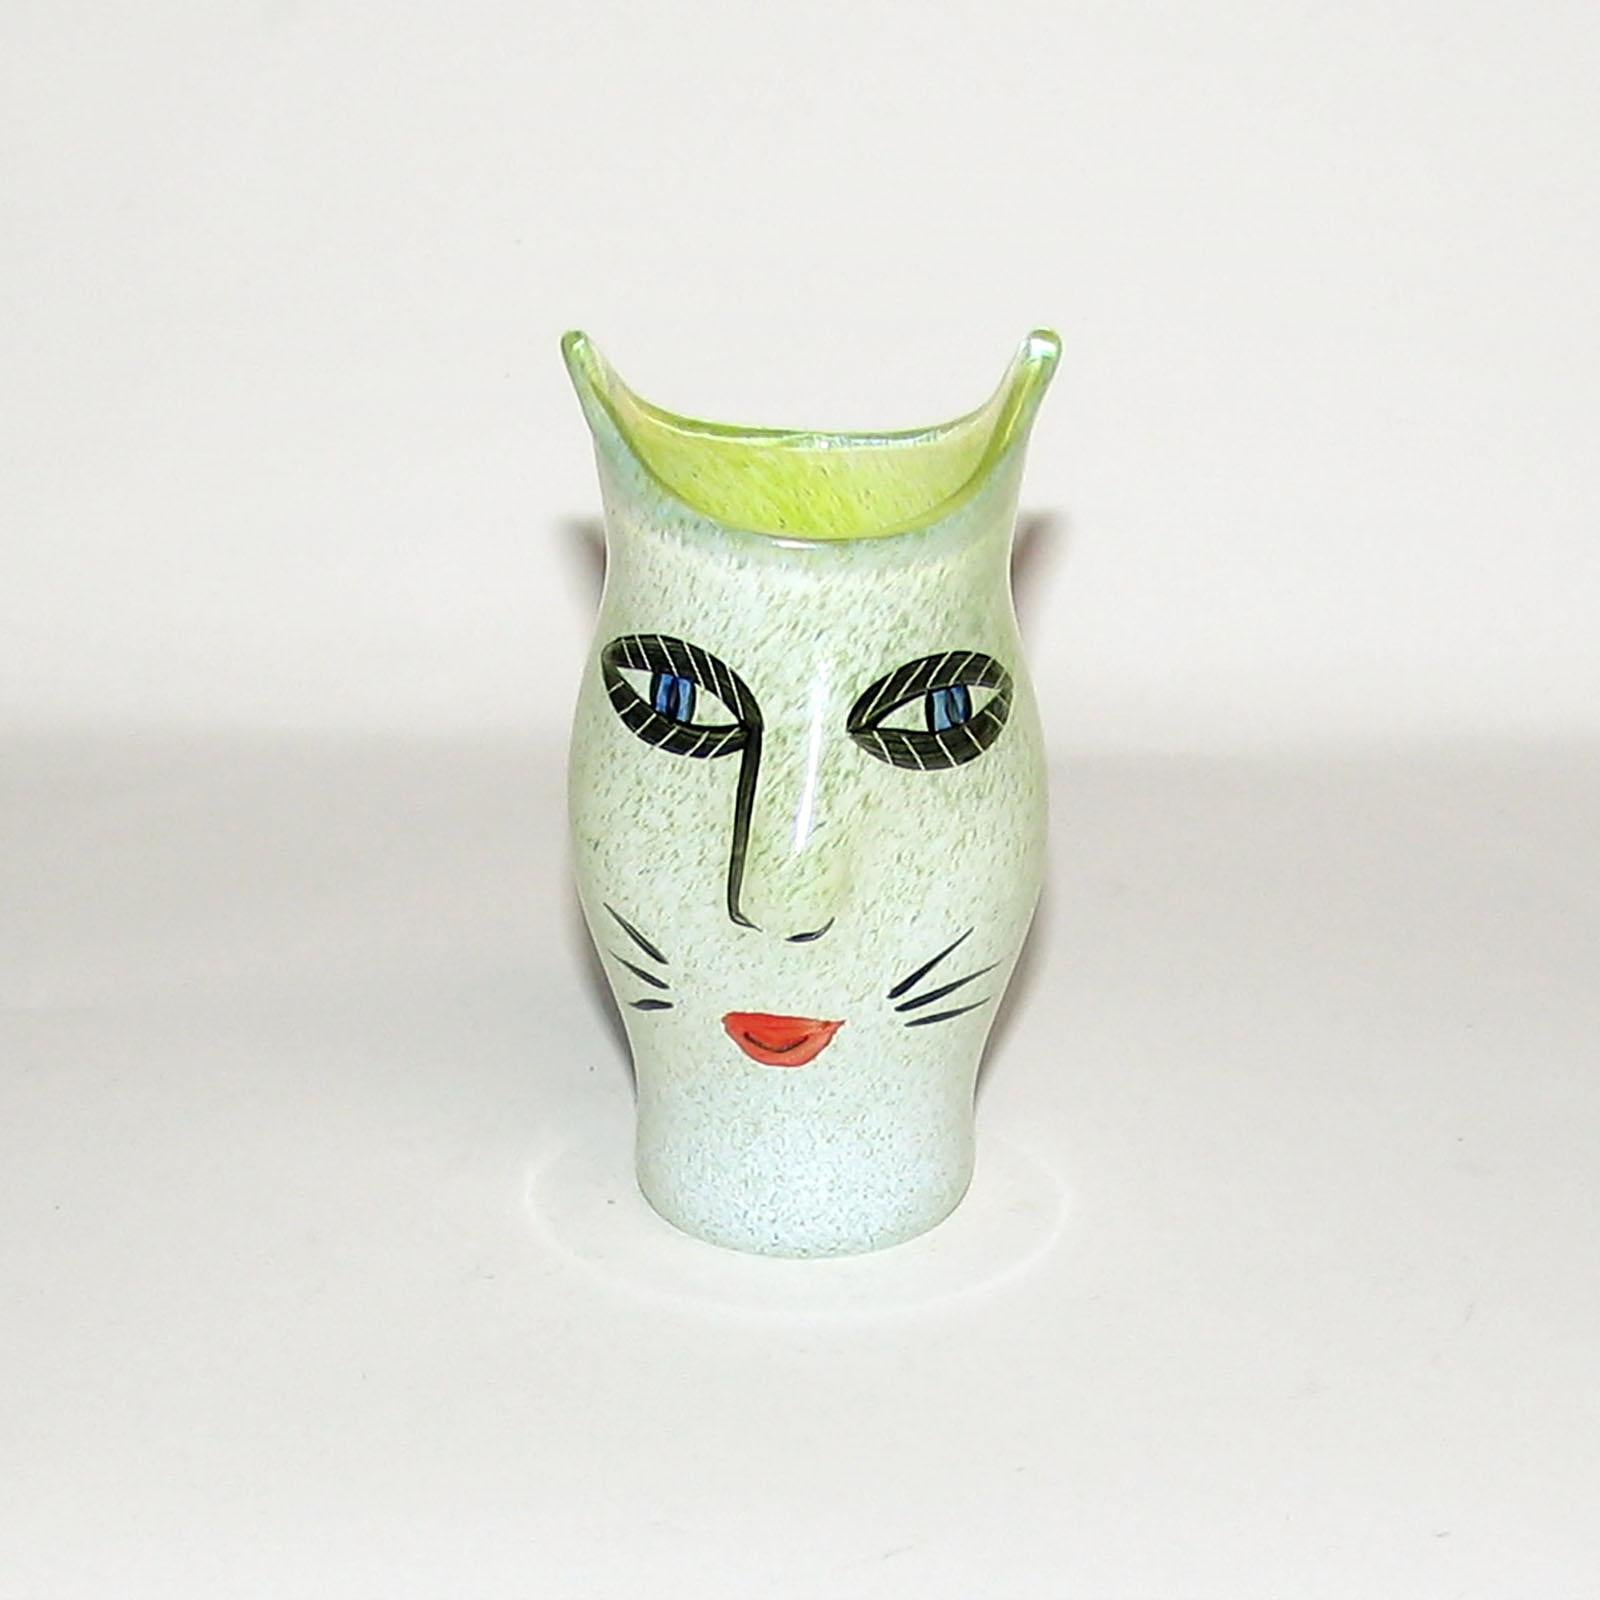 Ulrica Hydman Vallien for Kosta Boda, Sweden. Vase in mouth blown art glass decorated with women's face. Swedish design, 1980s.
Measures: 9.5 x 5 cm.
In perfect condition.
Signed.